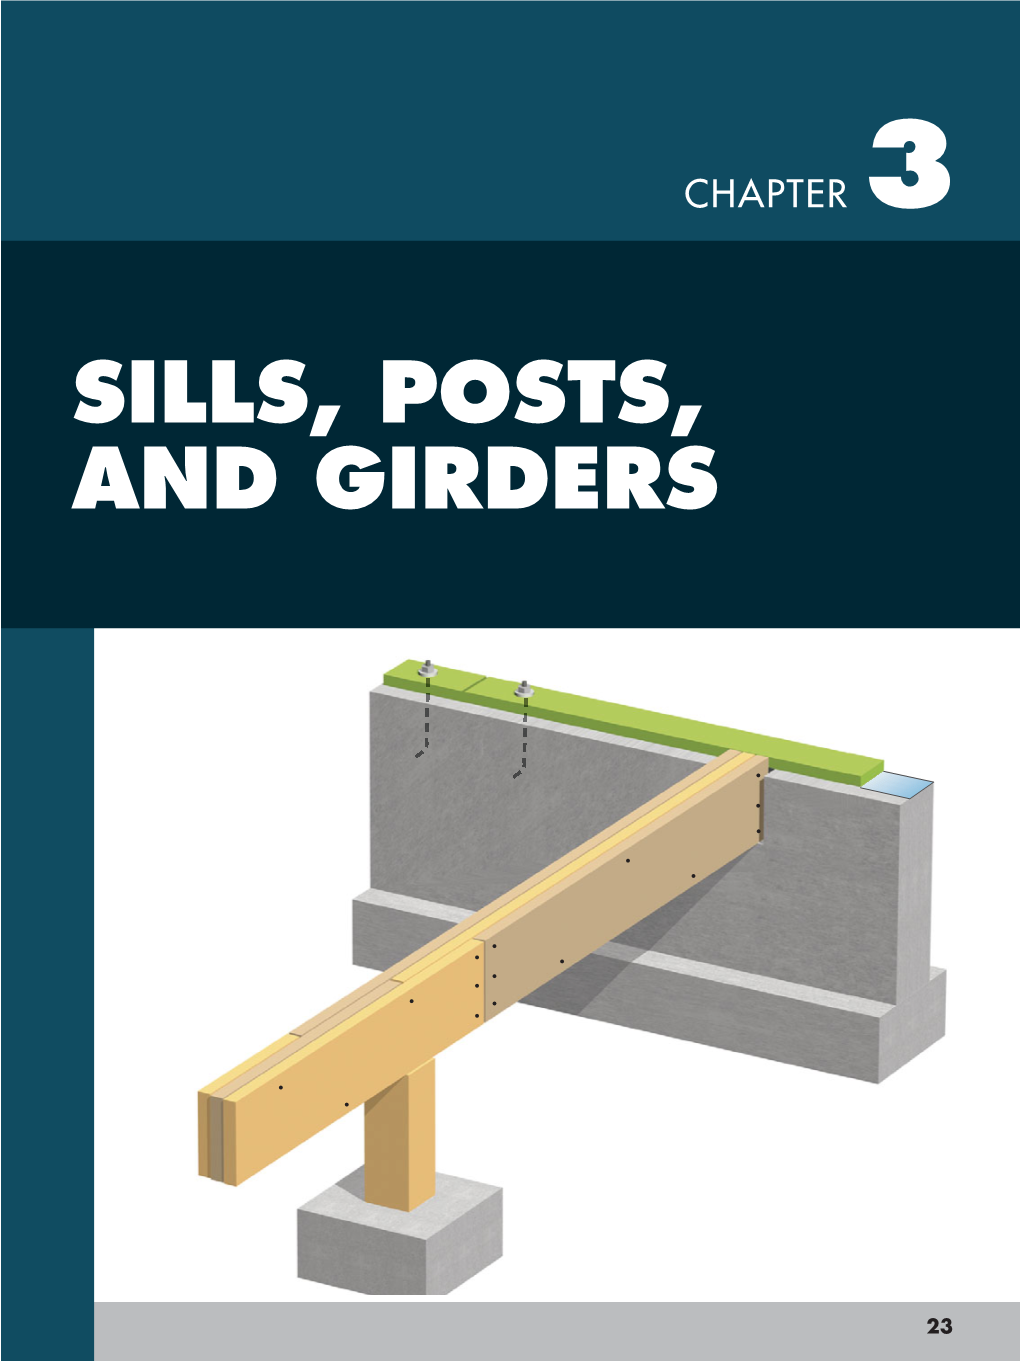 Sills, Posts, and Girders